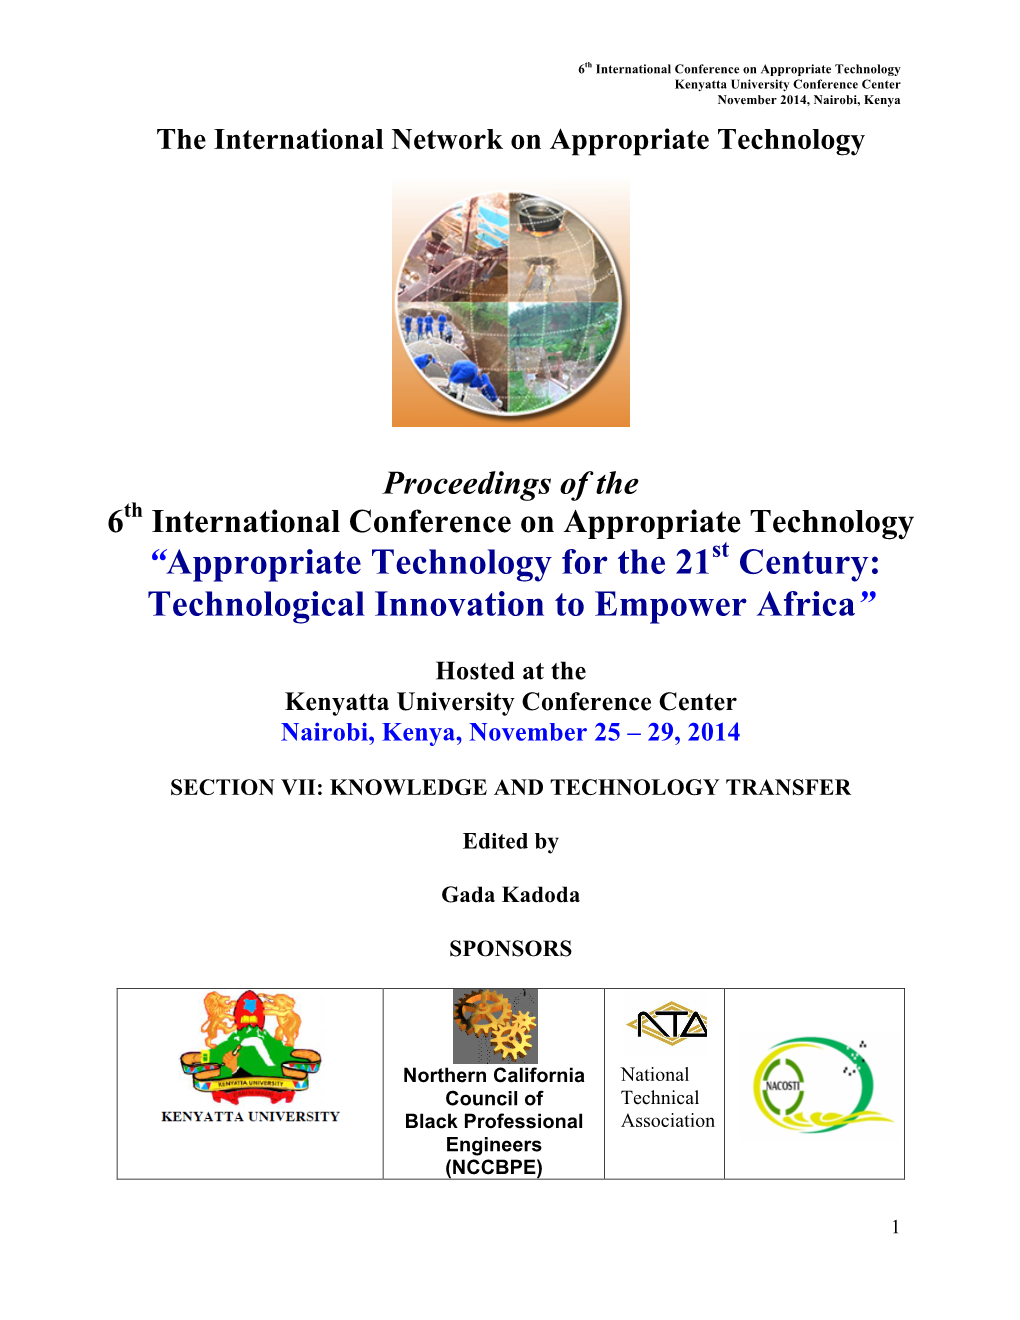 Section Vii: Knowledge and Technology Transfer